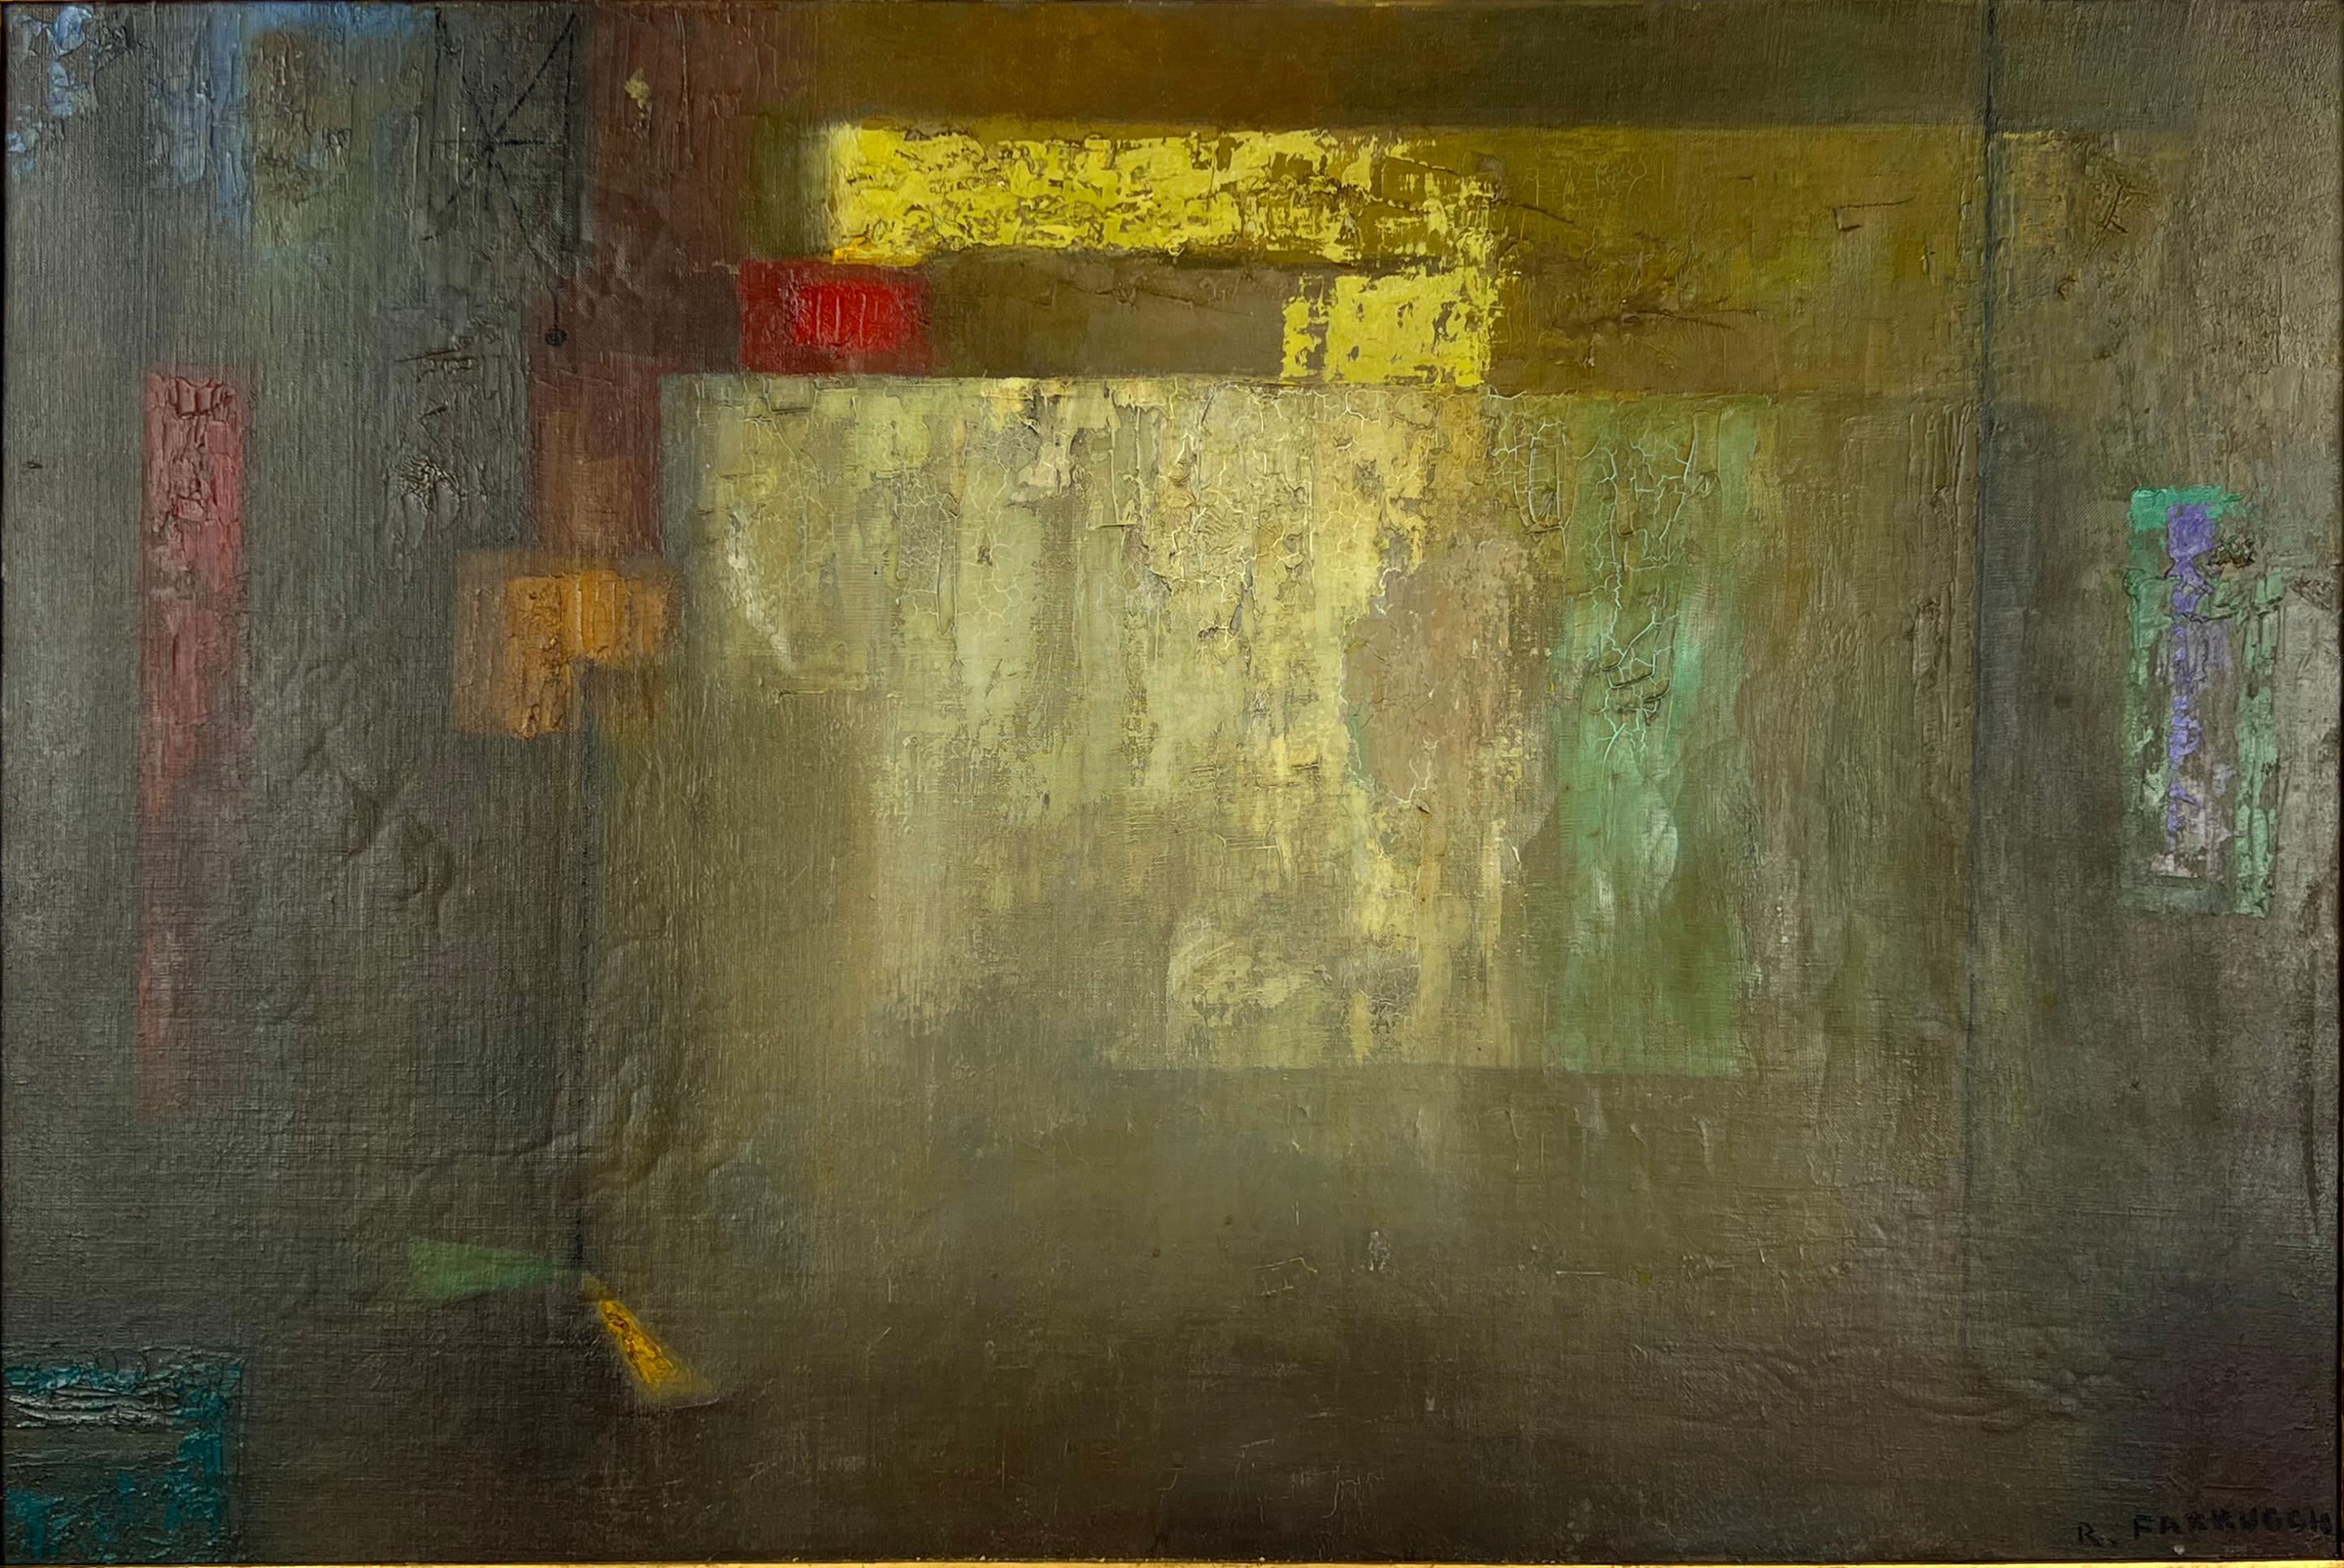 Abstract Expressionist Geometric Oil on Linen Blocks of Color Diffusion 1967 - Painting by Remo Michael Farruggio